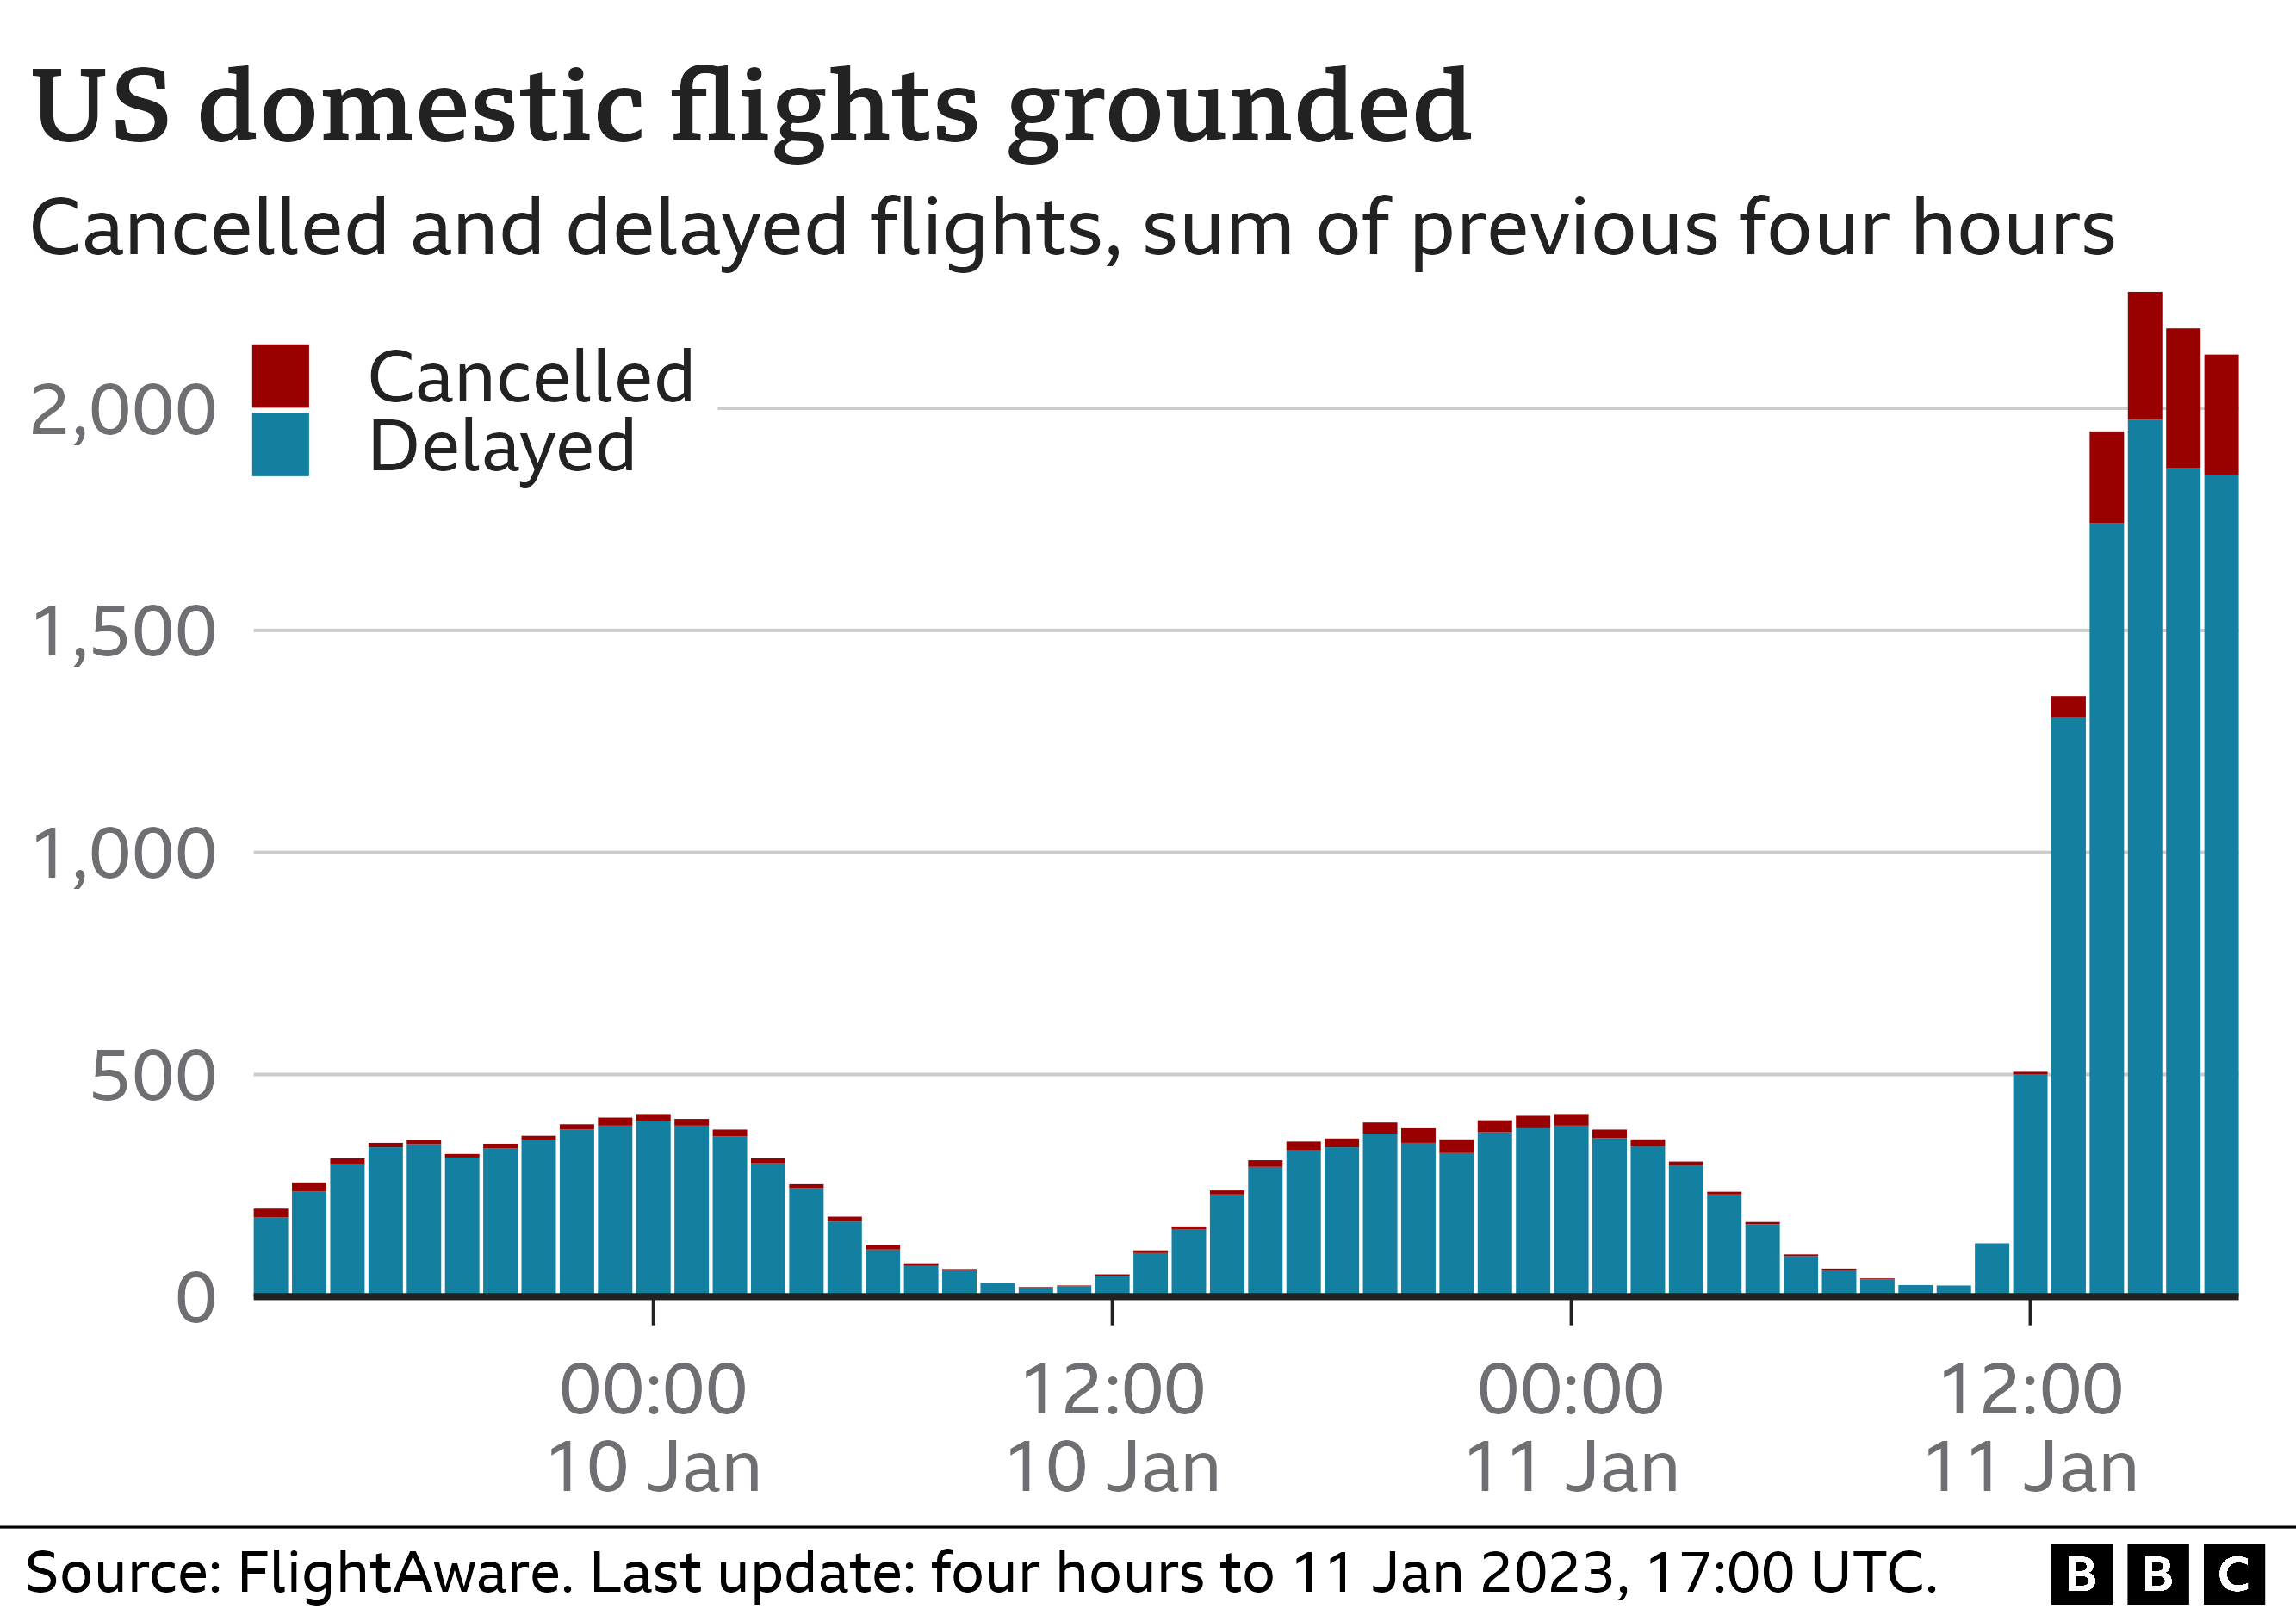 Chart showing grounded and delayed US flights